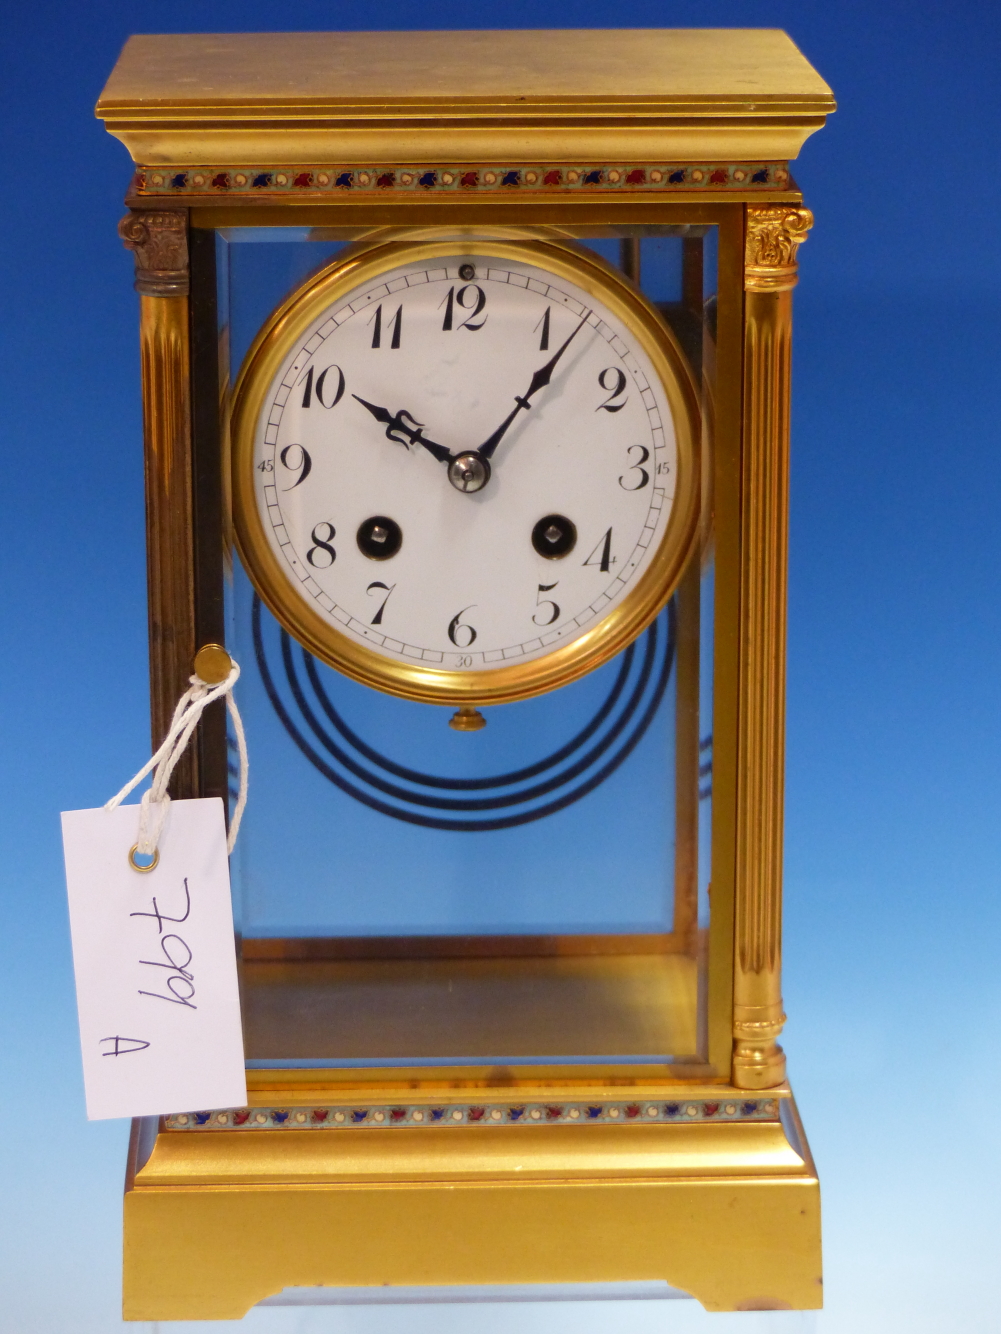 A FRENCH GILT METAL MOUNTED BEVELLED GLASS CASED MANTEL CLOCK STRIKING ON A COILED ROD, THE